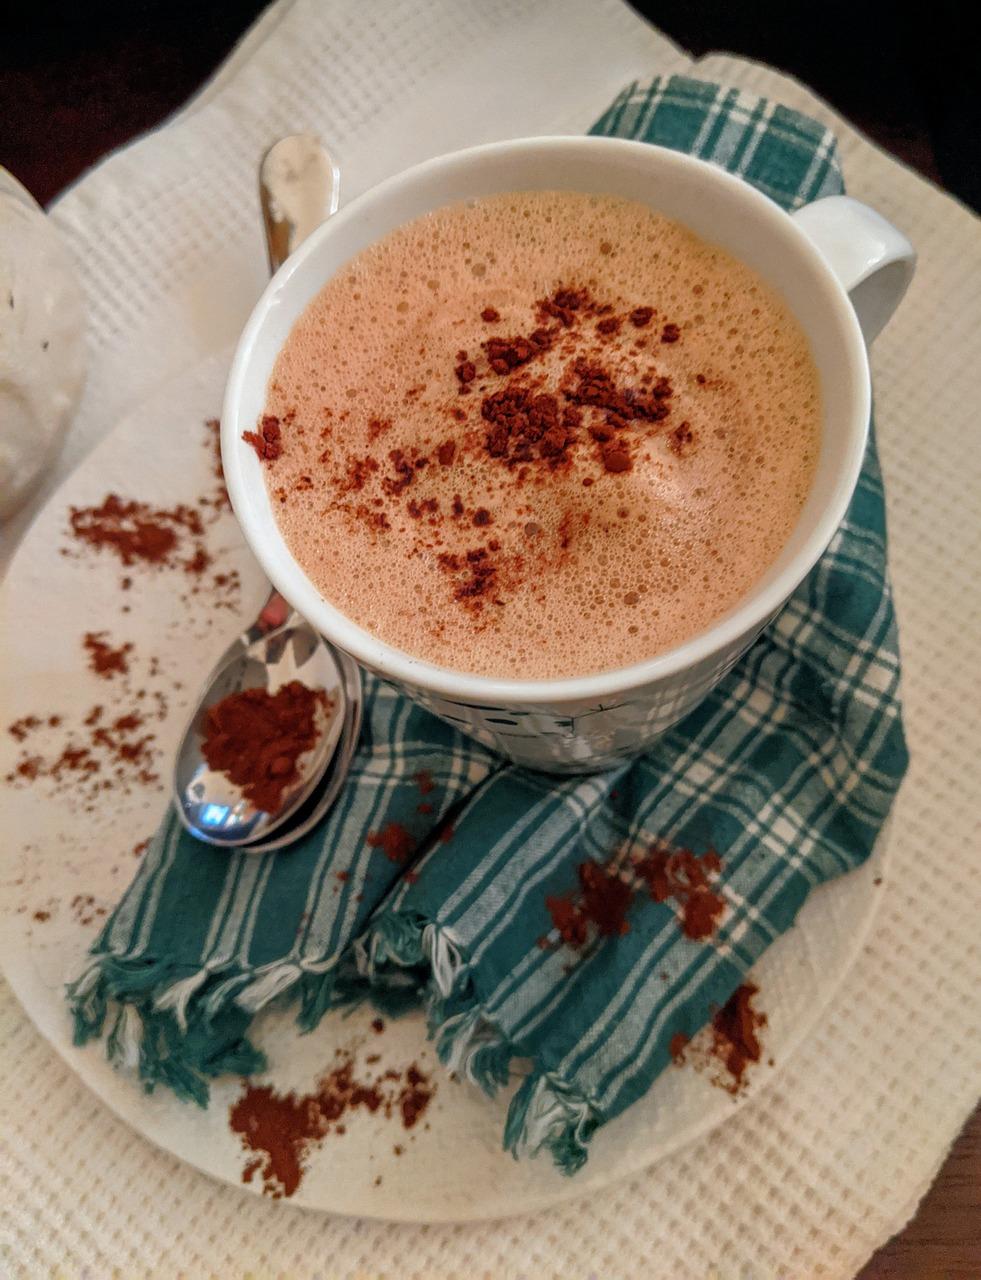 Can you use Nesquik to make hot chocolate? 